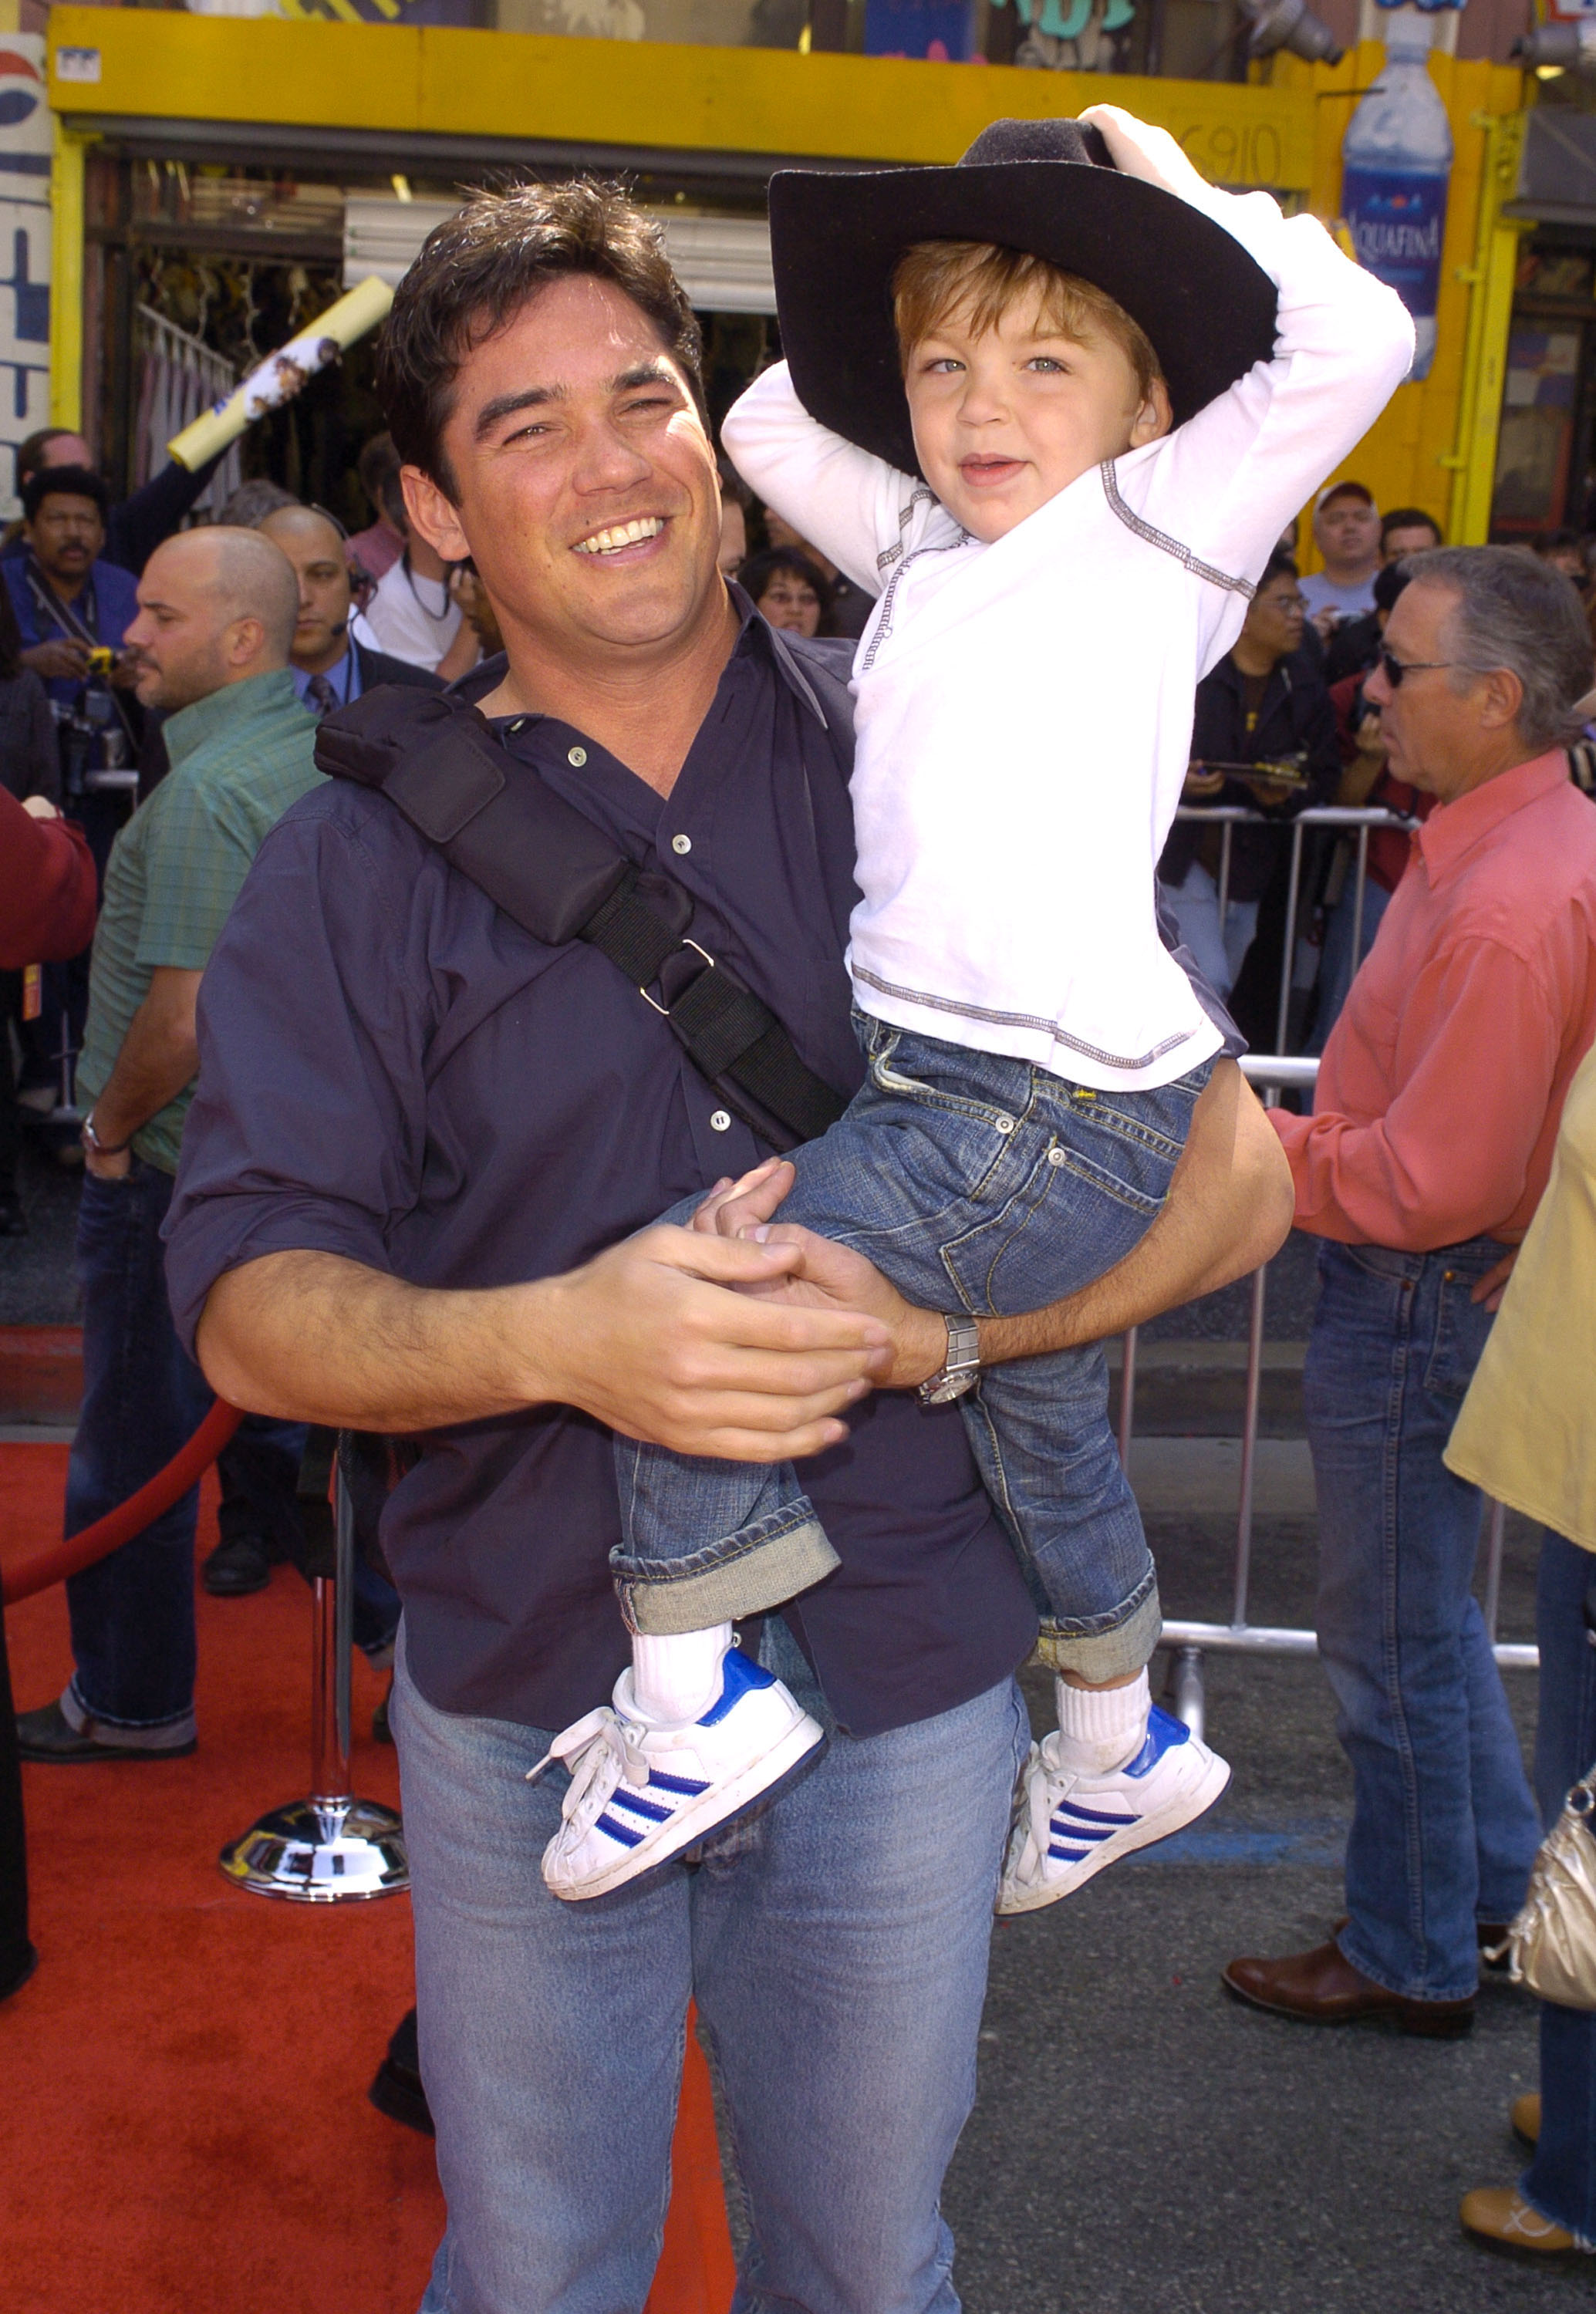 Dean and Christopher Cain at the premiere of "Home on the Range" in Hollywood, California in 2004 | Source: Getty Image